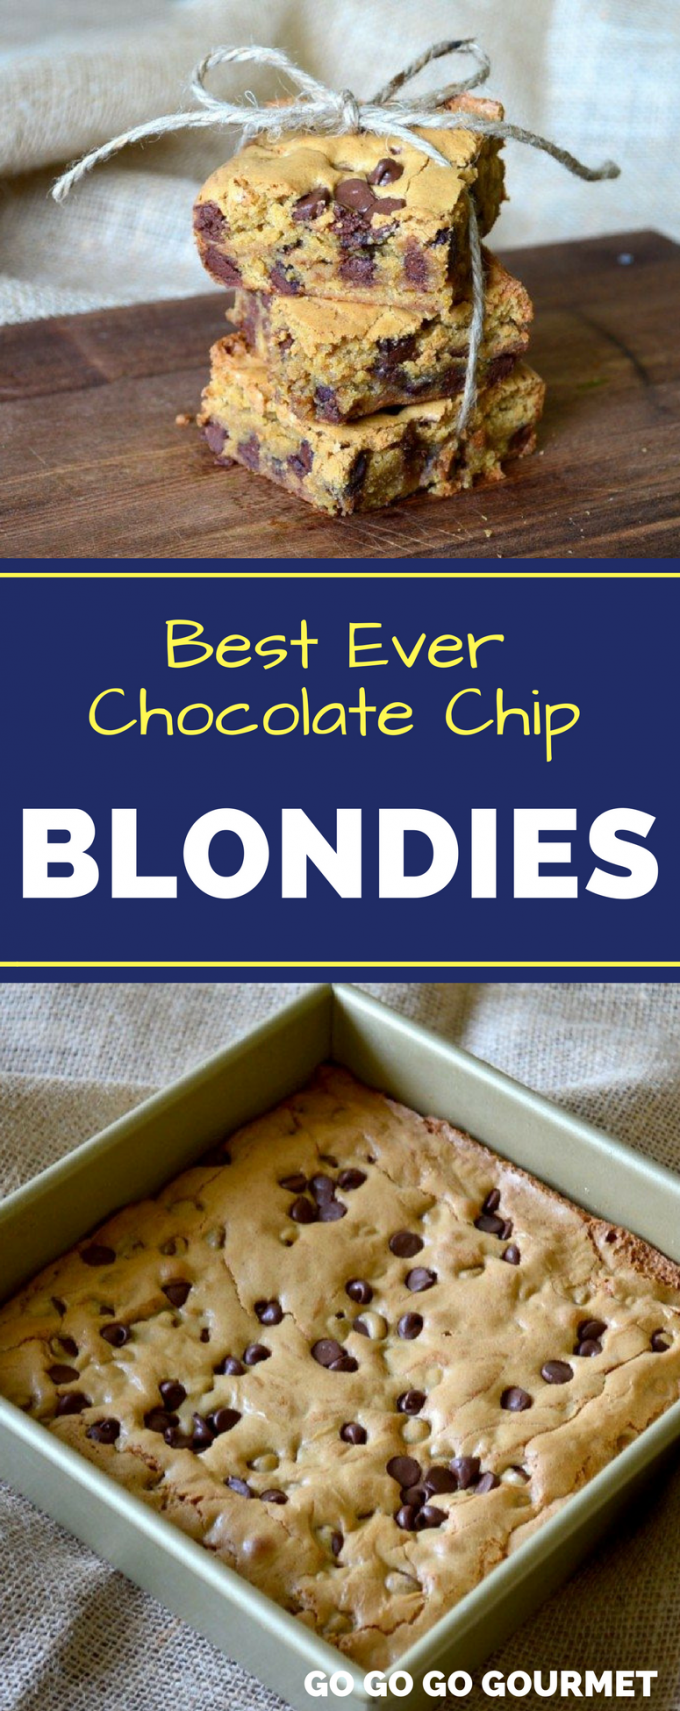 This easy Chocolate Chip Blondies recipe is the best! Gooey and chewy, these bars make the perfect dessert for any occasion! No need for Toll House, this recipe could not be easier! #gogogogourmet #chocolatechipblondies #blondiesrecipe #easycookiebars via @gogogogourmet